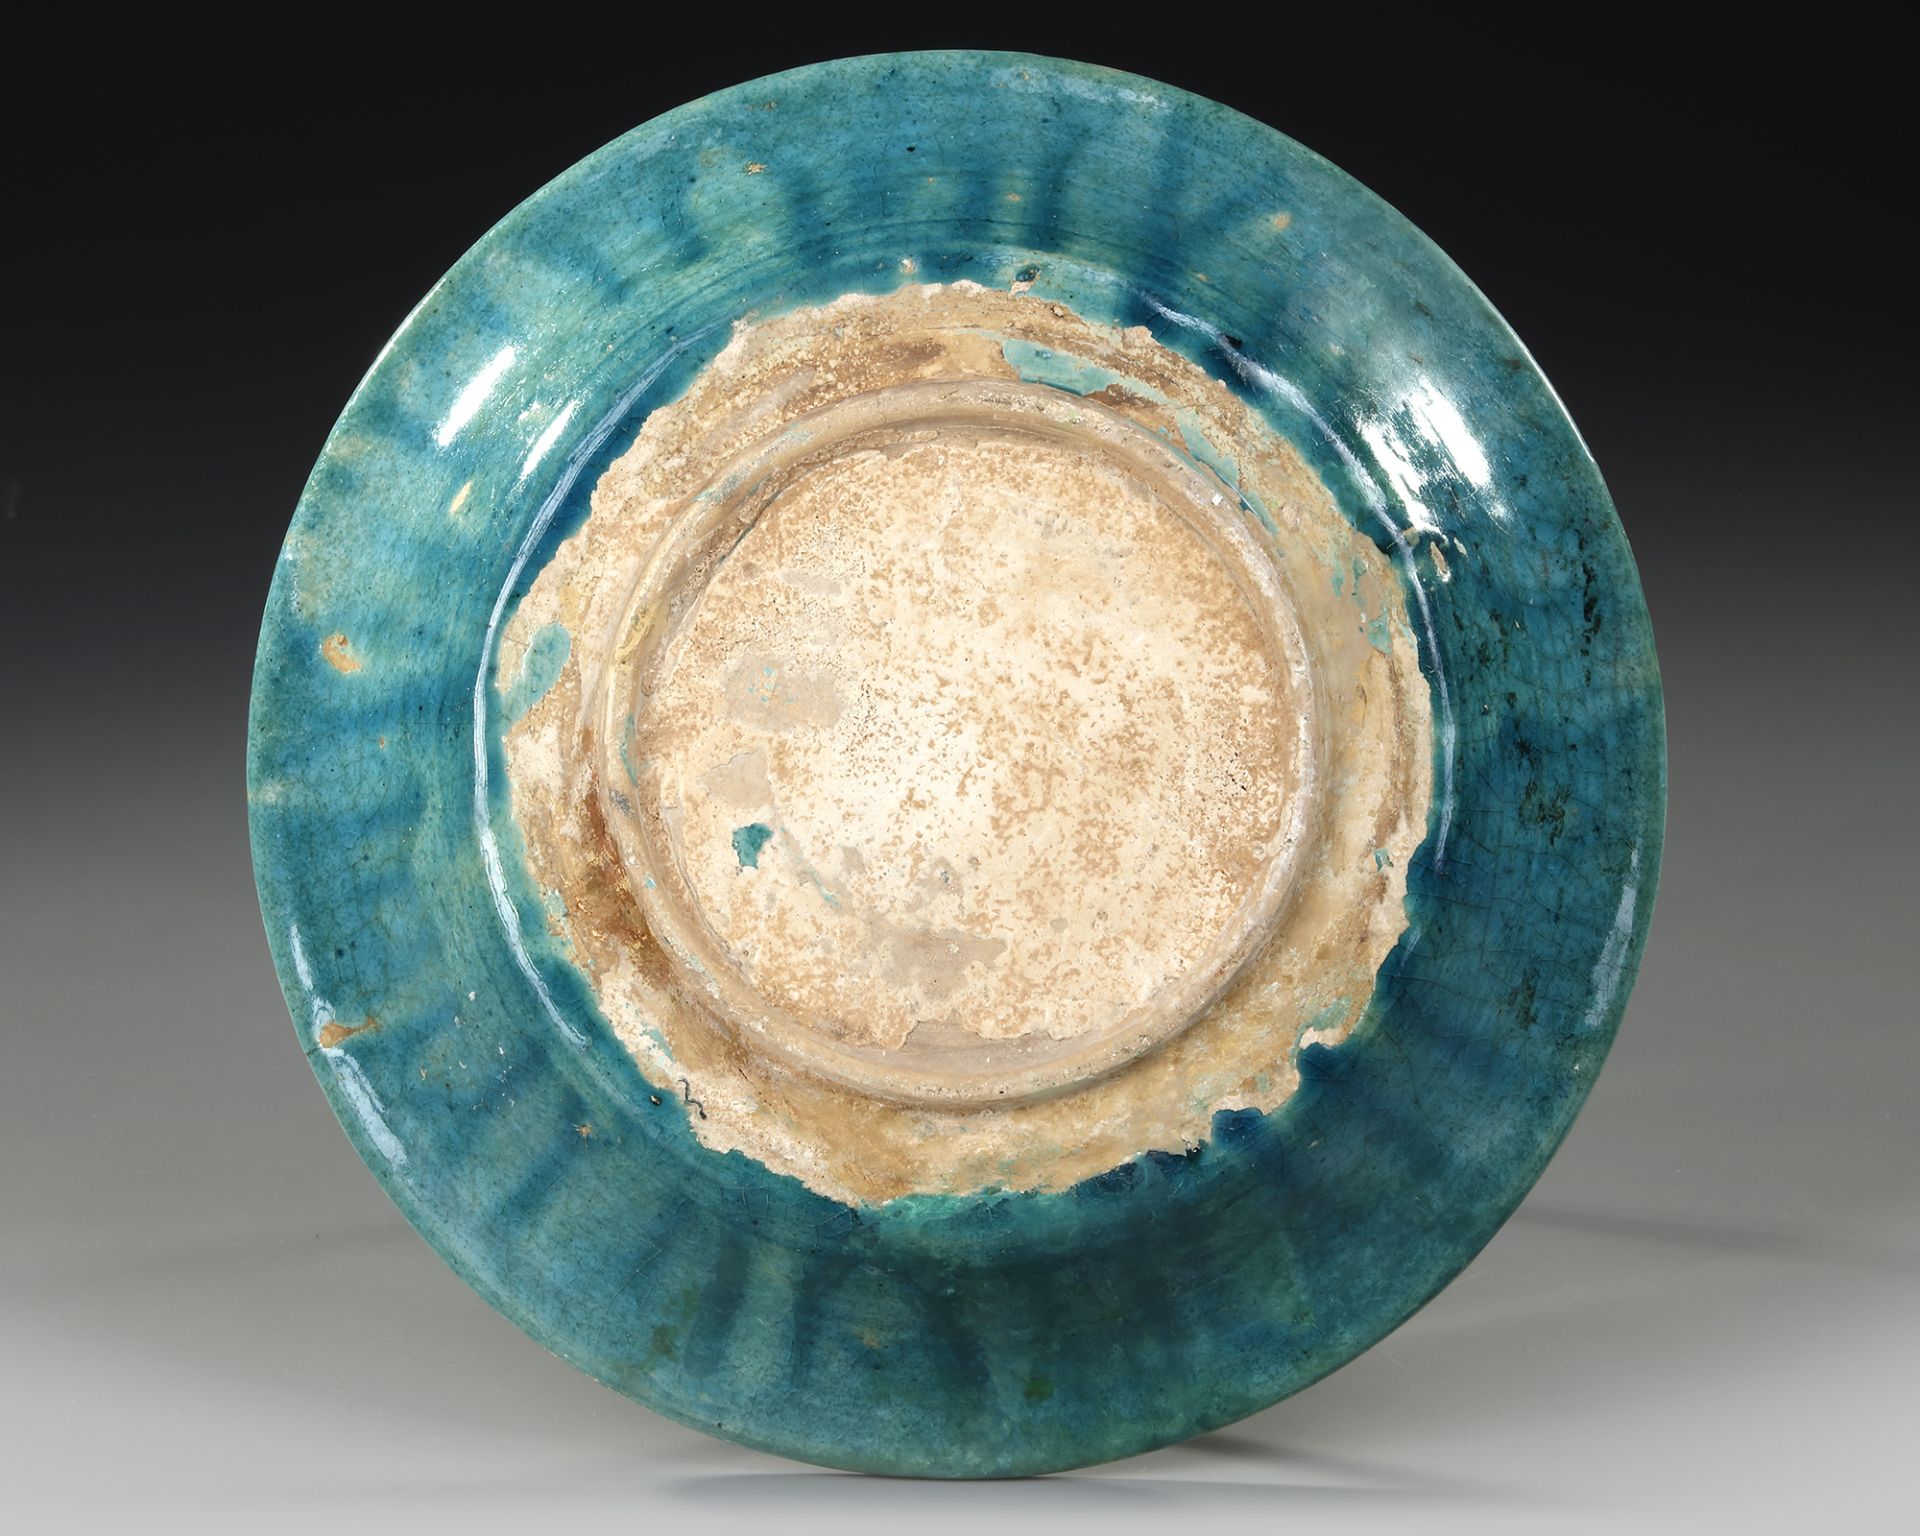 A RAQQA TURQUOISE-GLAZED POTTERY DISH, SYRIA, EARLY 13TH CENTURY - Image 8 of 8